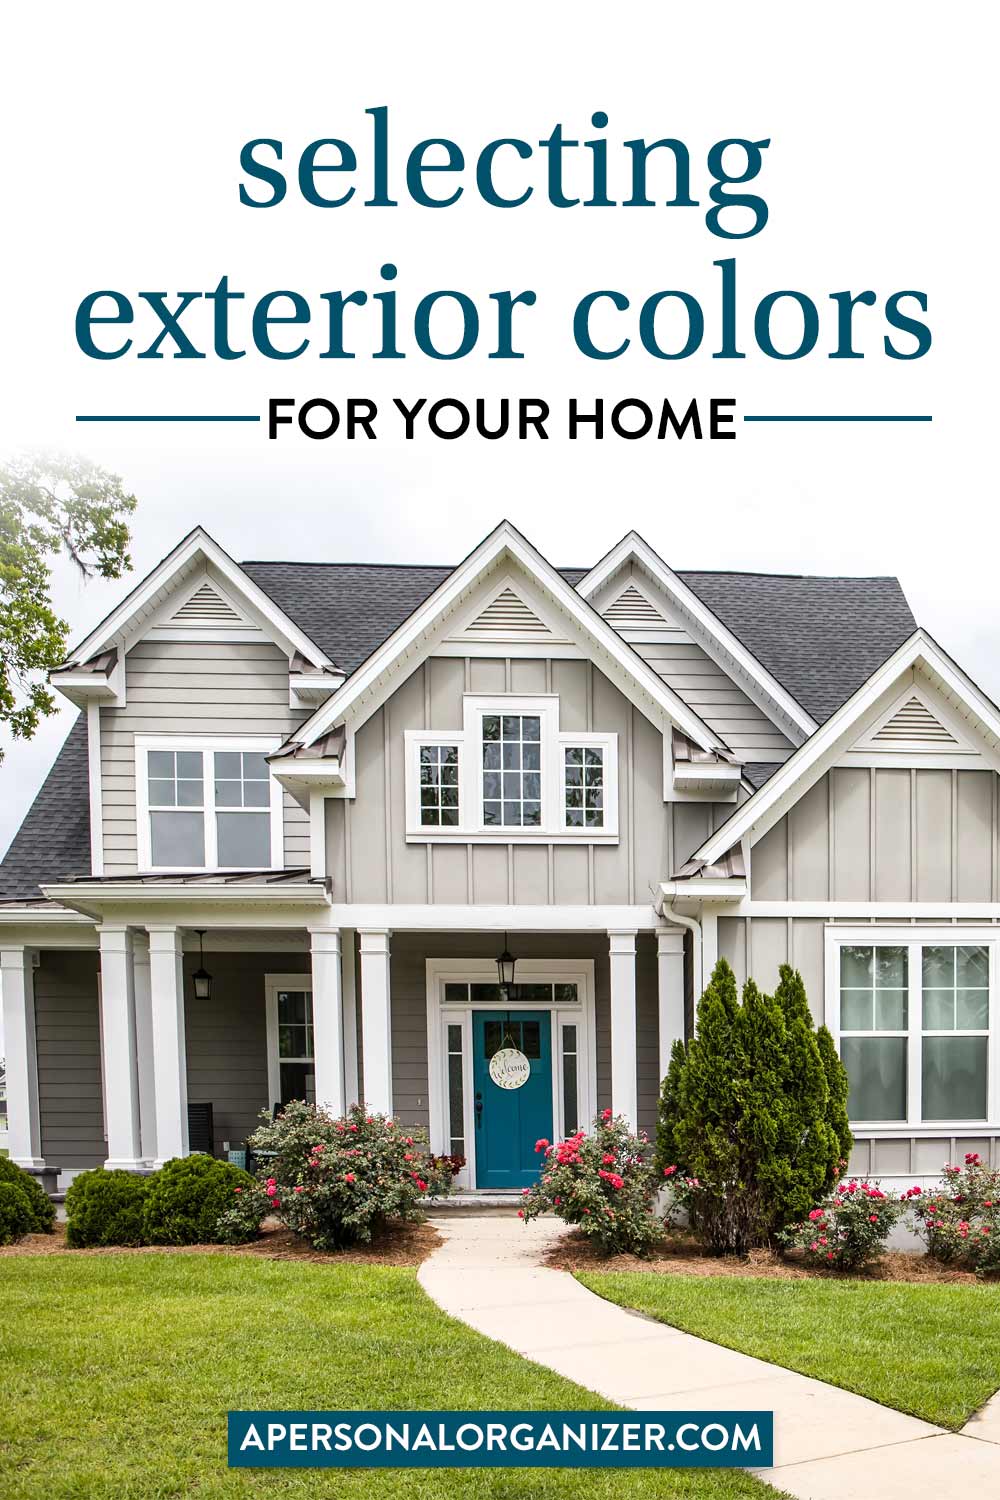 Our New Home - Choosing Exterior Colors & A Checklist